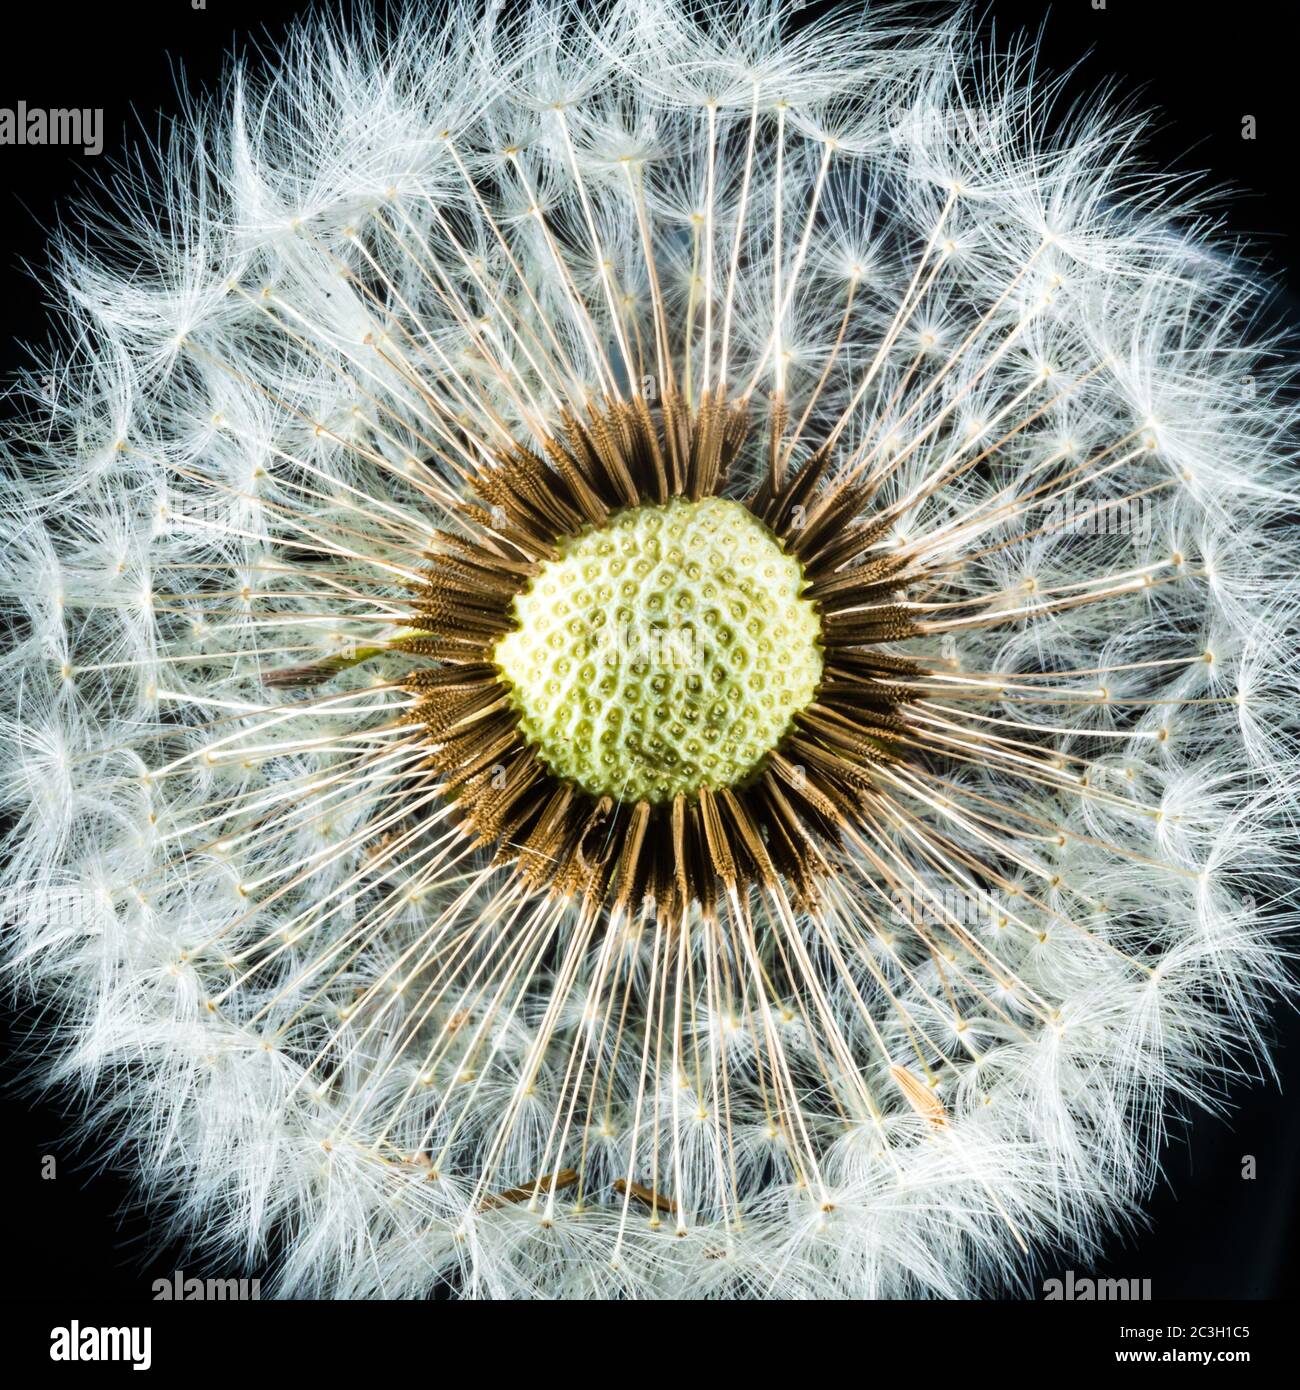 Closeup shot of a red-seeded dandelion on a black background Stock Photo